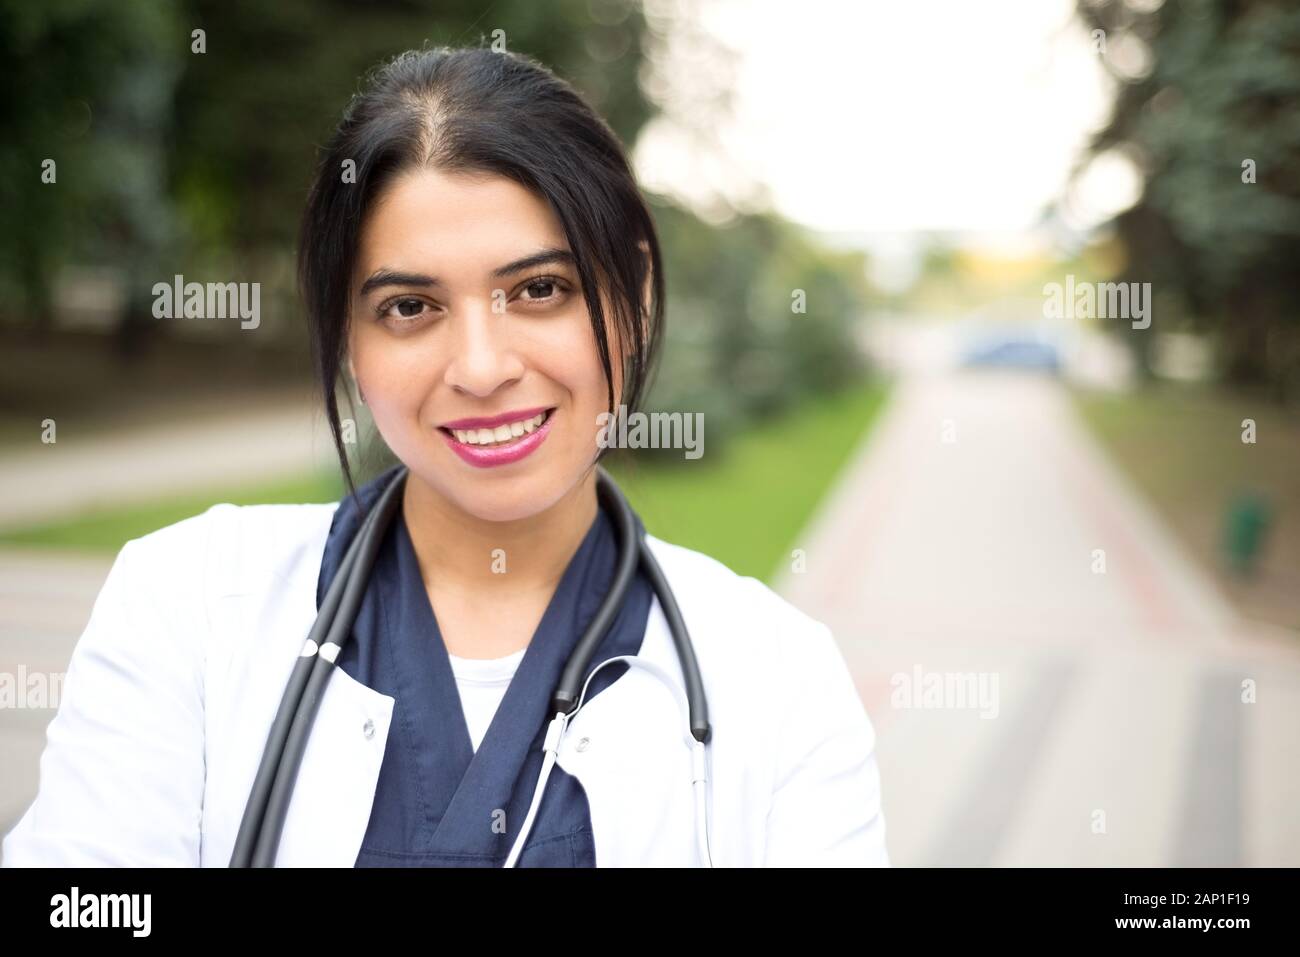 portrait of a beautiful, young mexican girl doctor. Smiles. Woman in a white coat with a stethoscope. Outdoor in Stock Photo